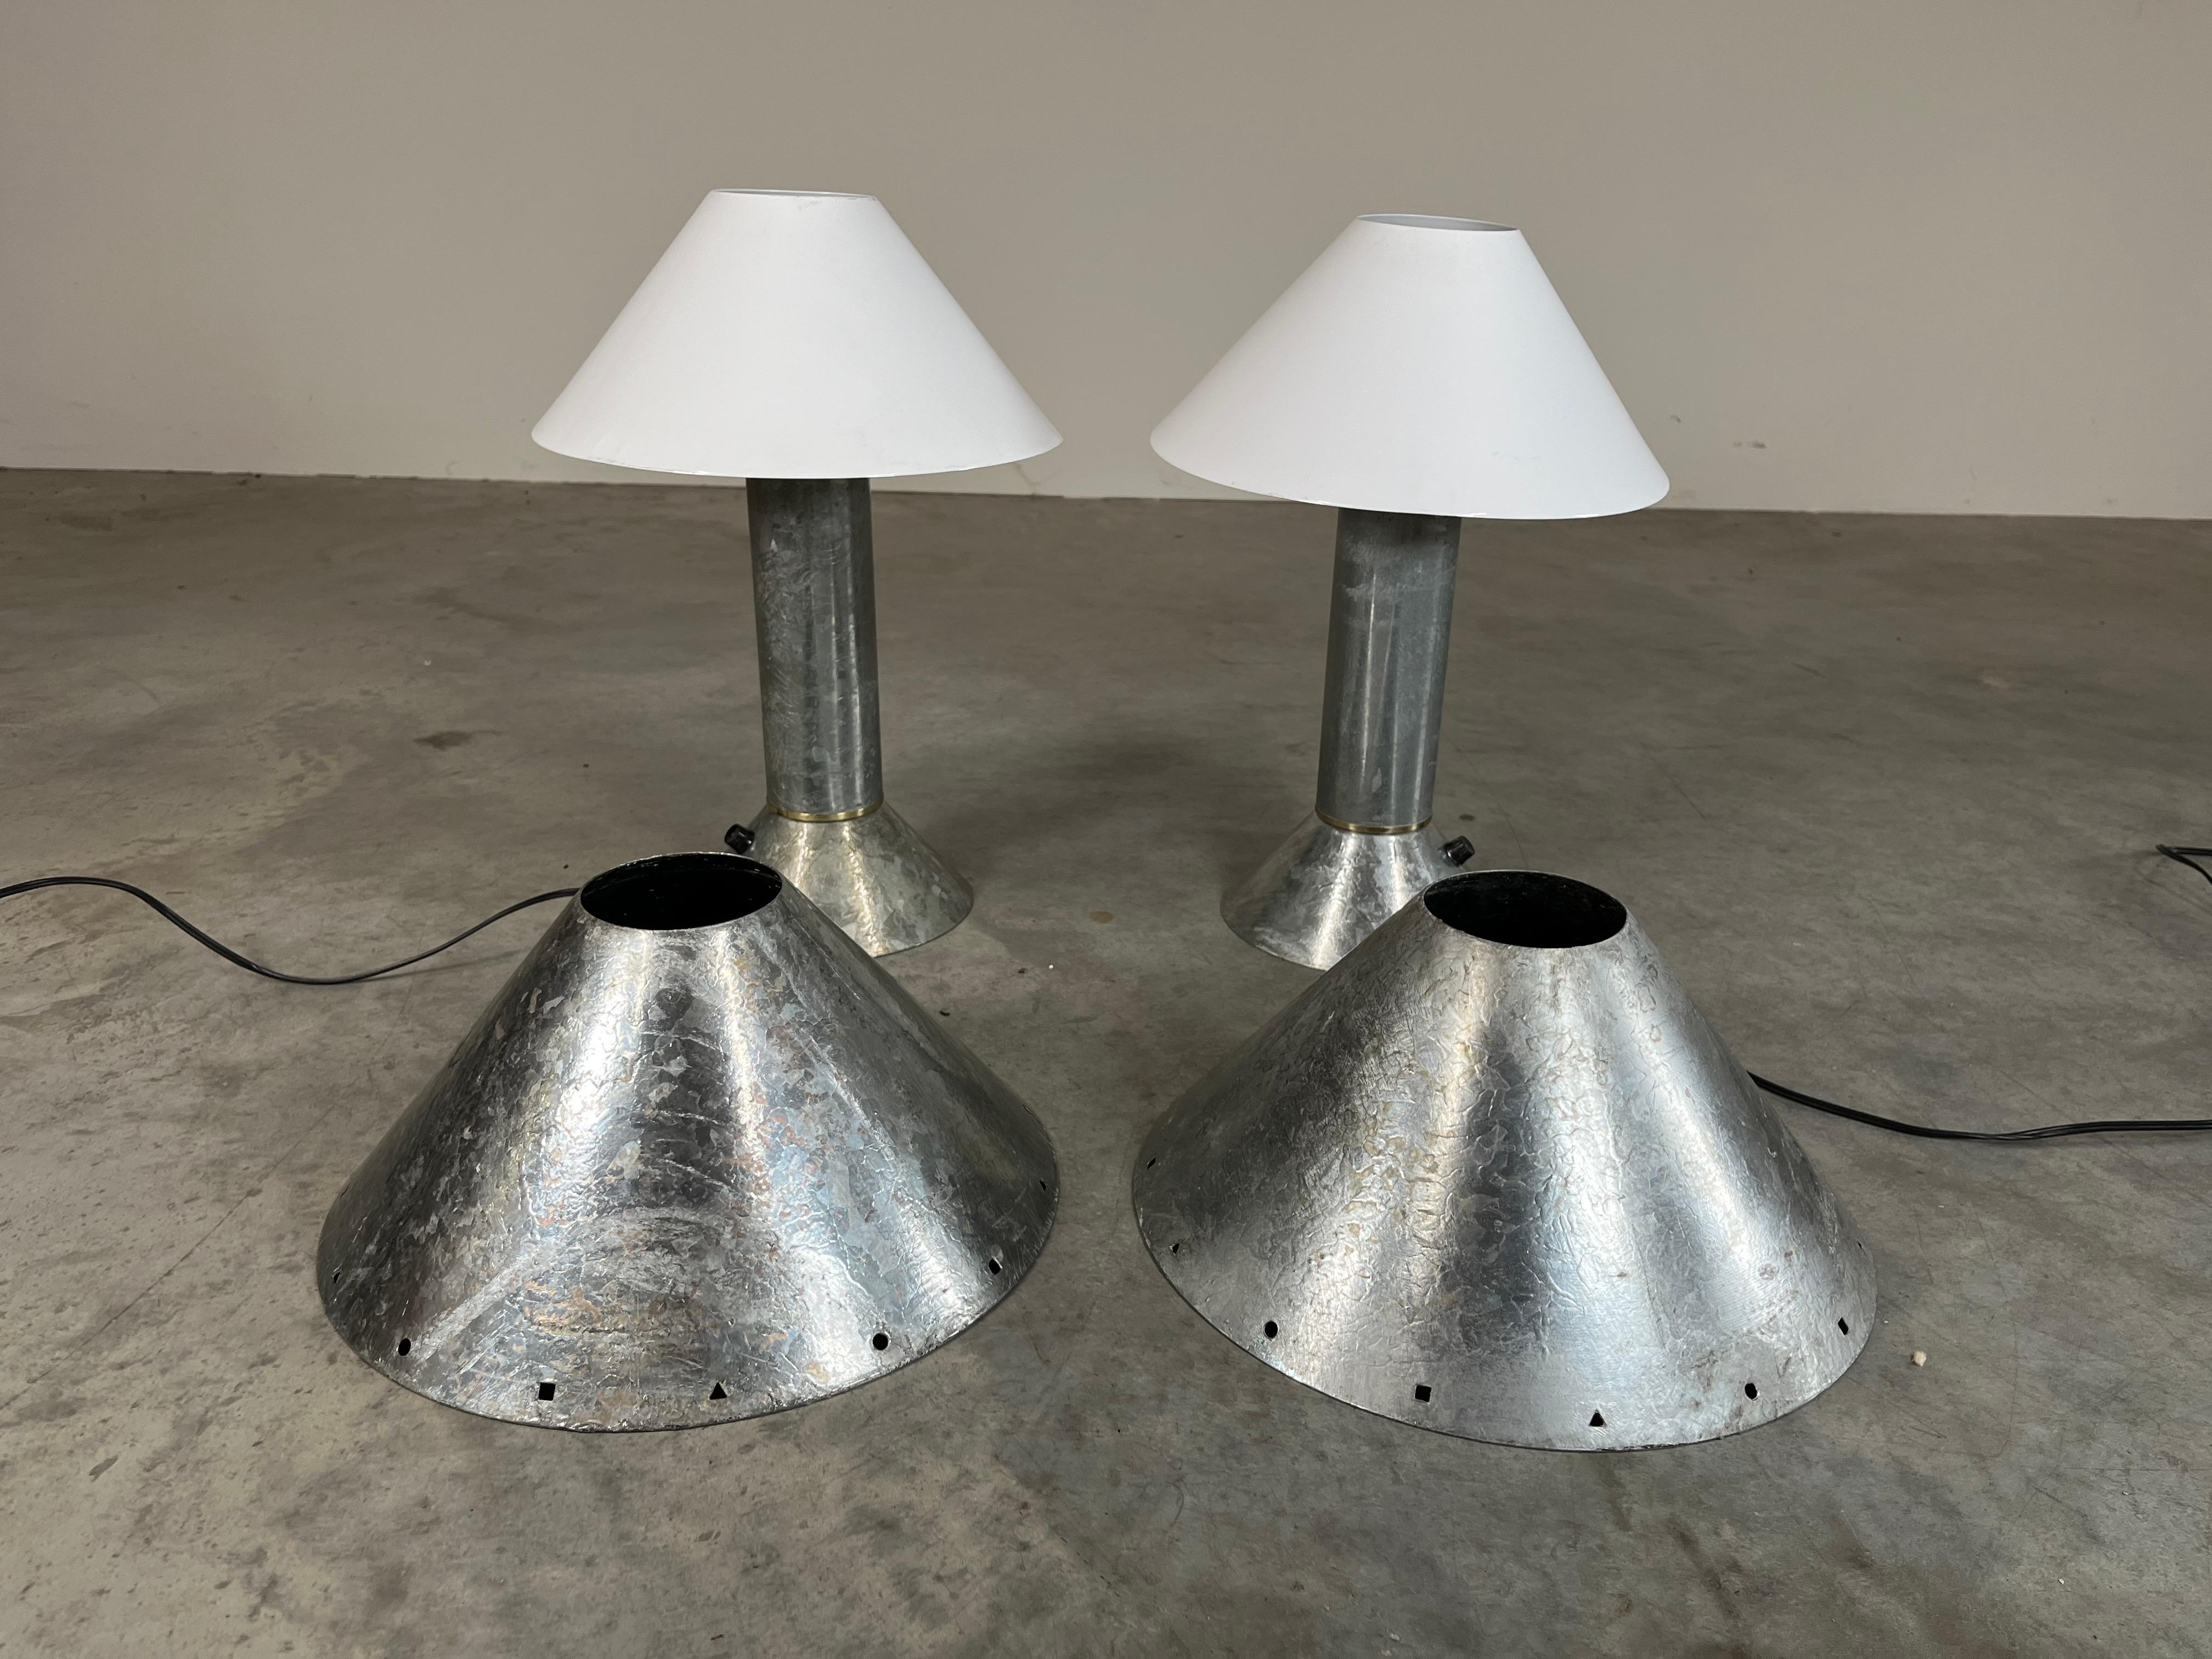 Rare Pair Of Ron Rezek Zinc Plated Modern Industrial Table Lamps Circa 1975 For Sale 1